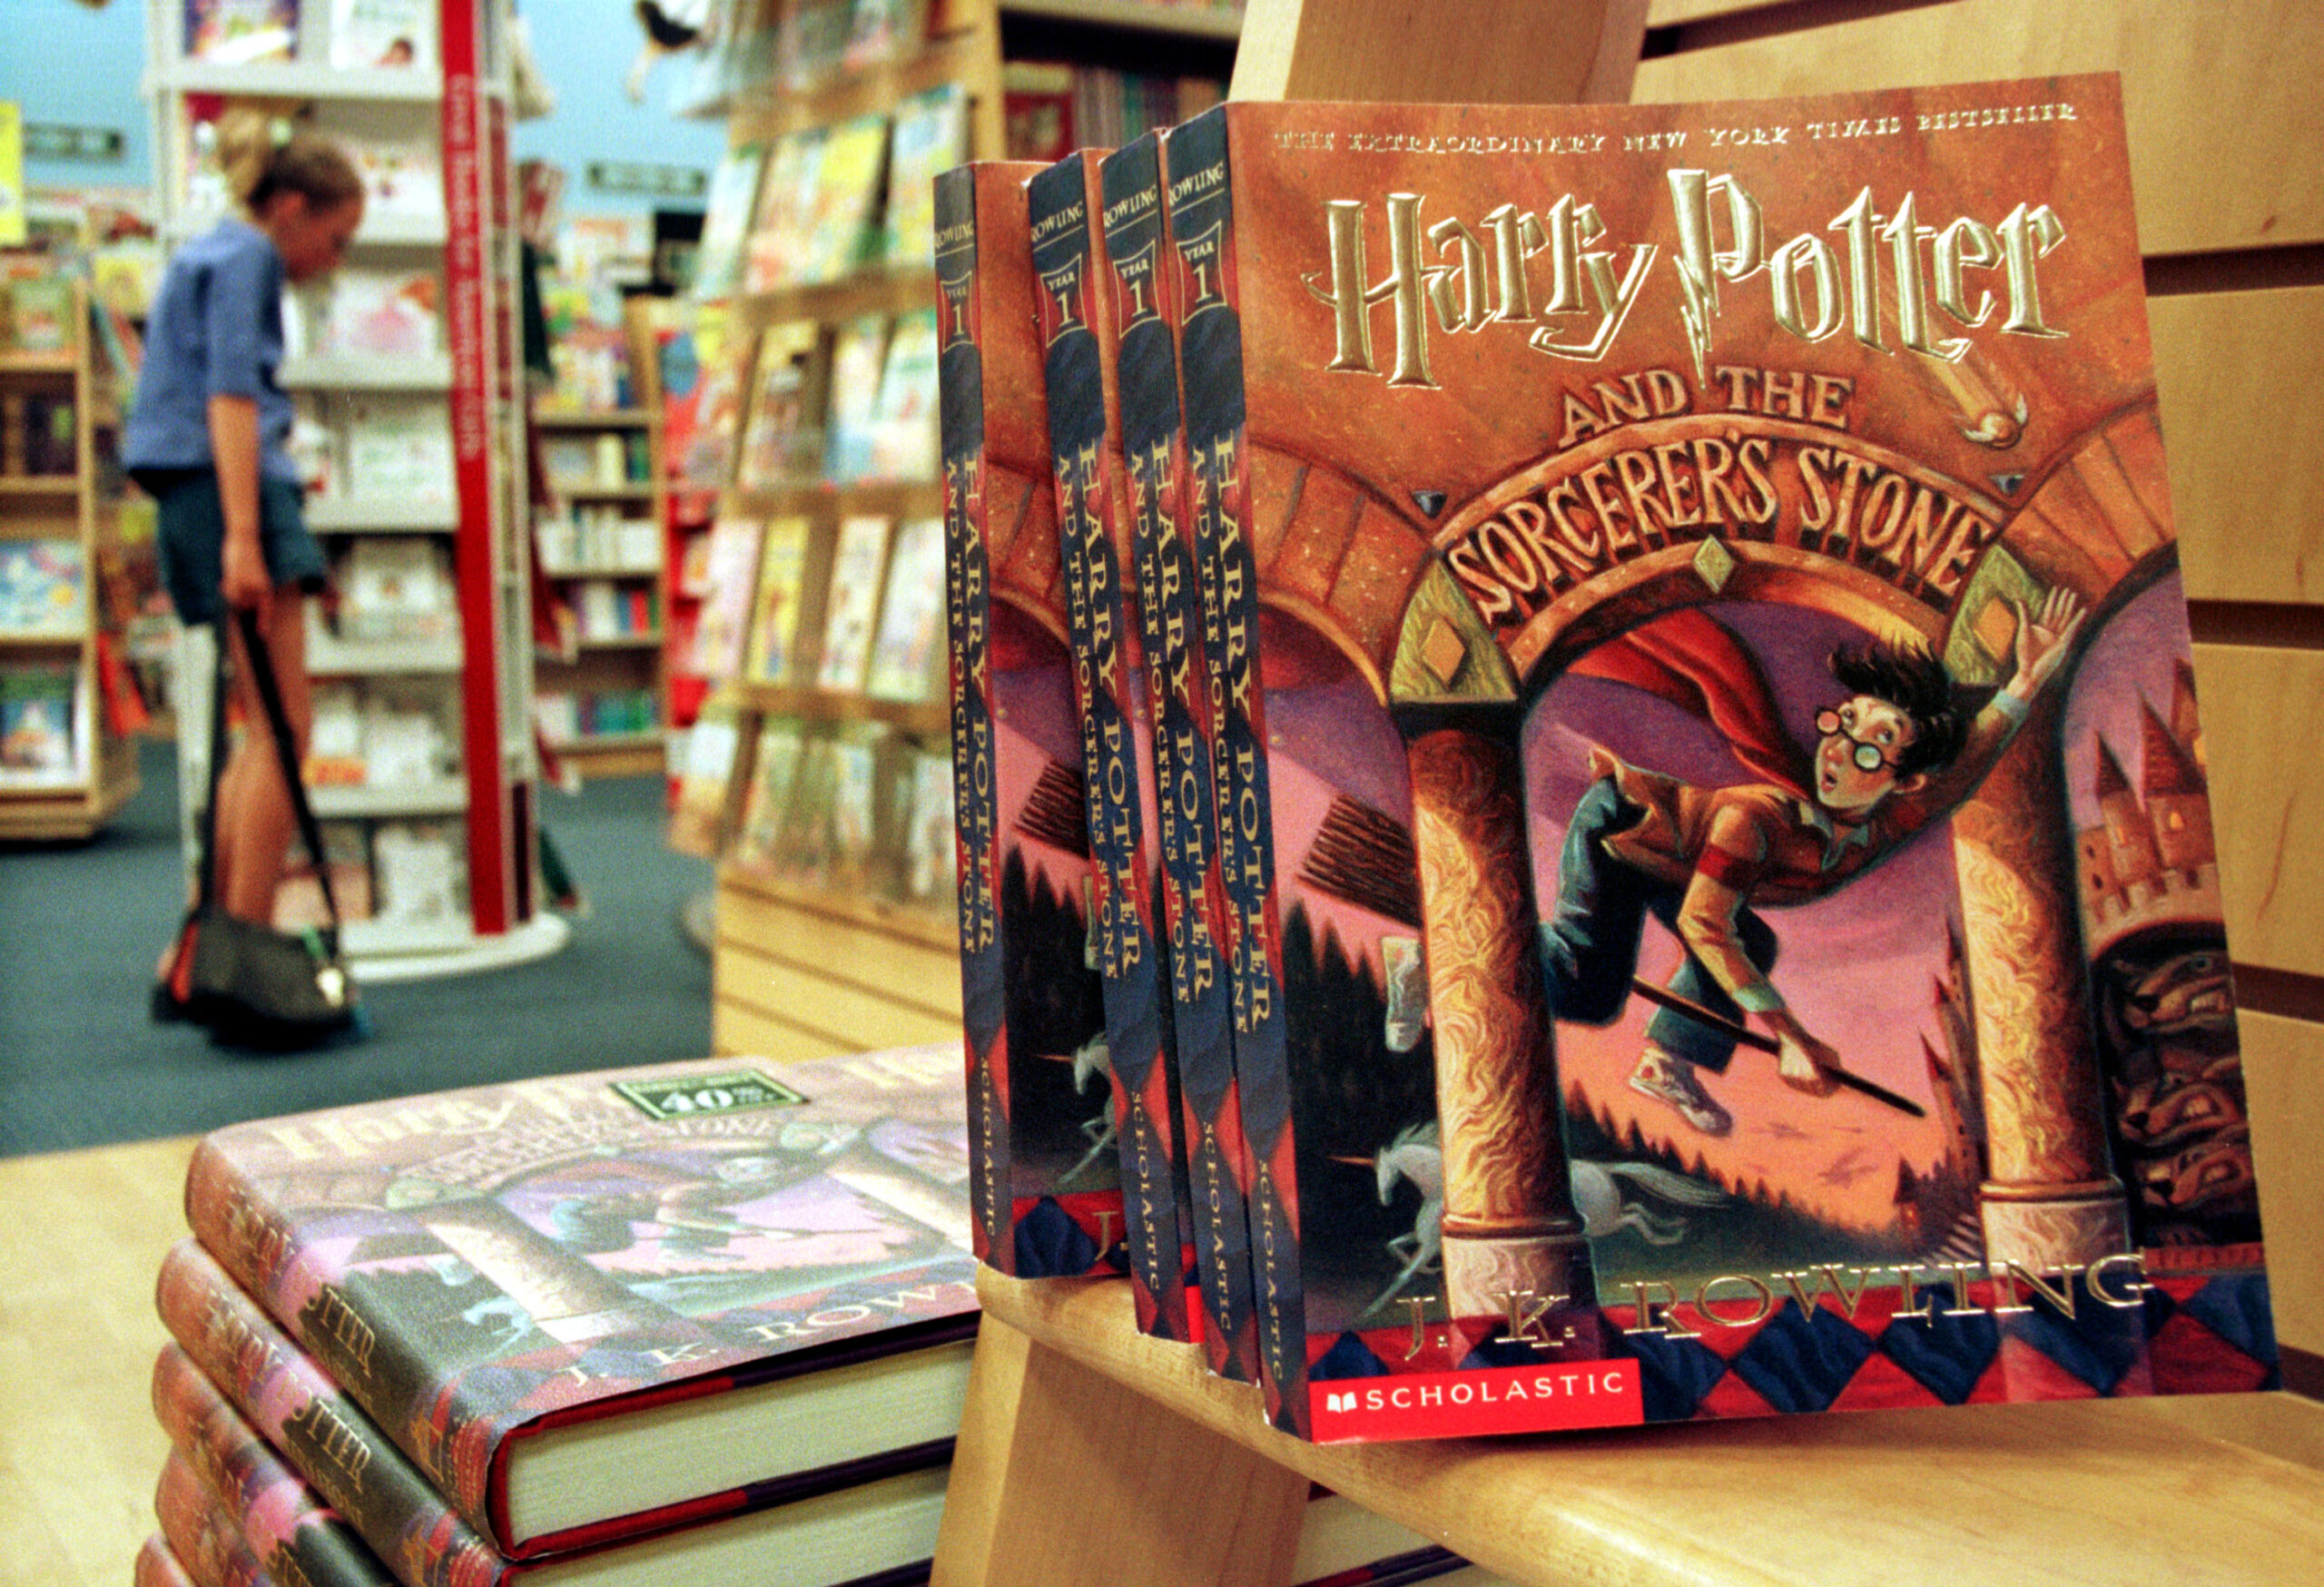 372284 01: Copies of author J. K. Rowling's Harry Potter series story books sit in a bookstore July 6, 2000 in Arlington, Va. Rowling's fourth book, "Harry Potter and the Goblet of Fire," is due for release just after midnight on July 8. (Photo by Alex Wong/Newsmakers)